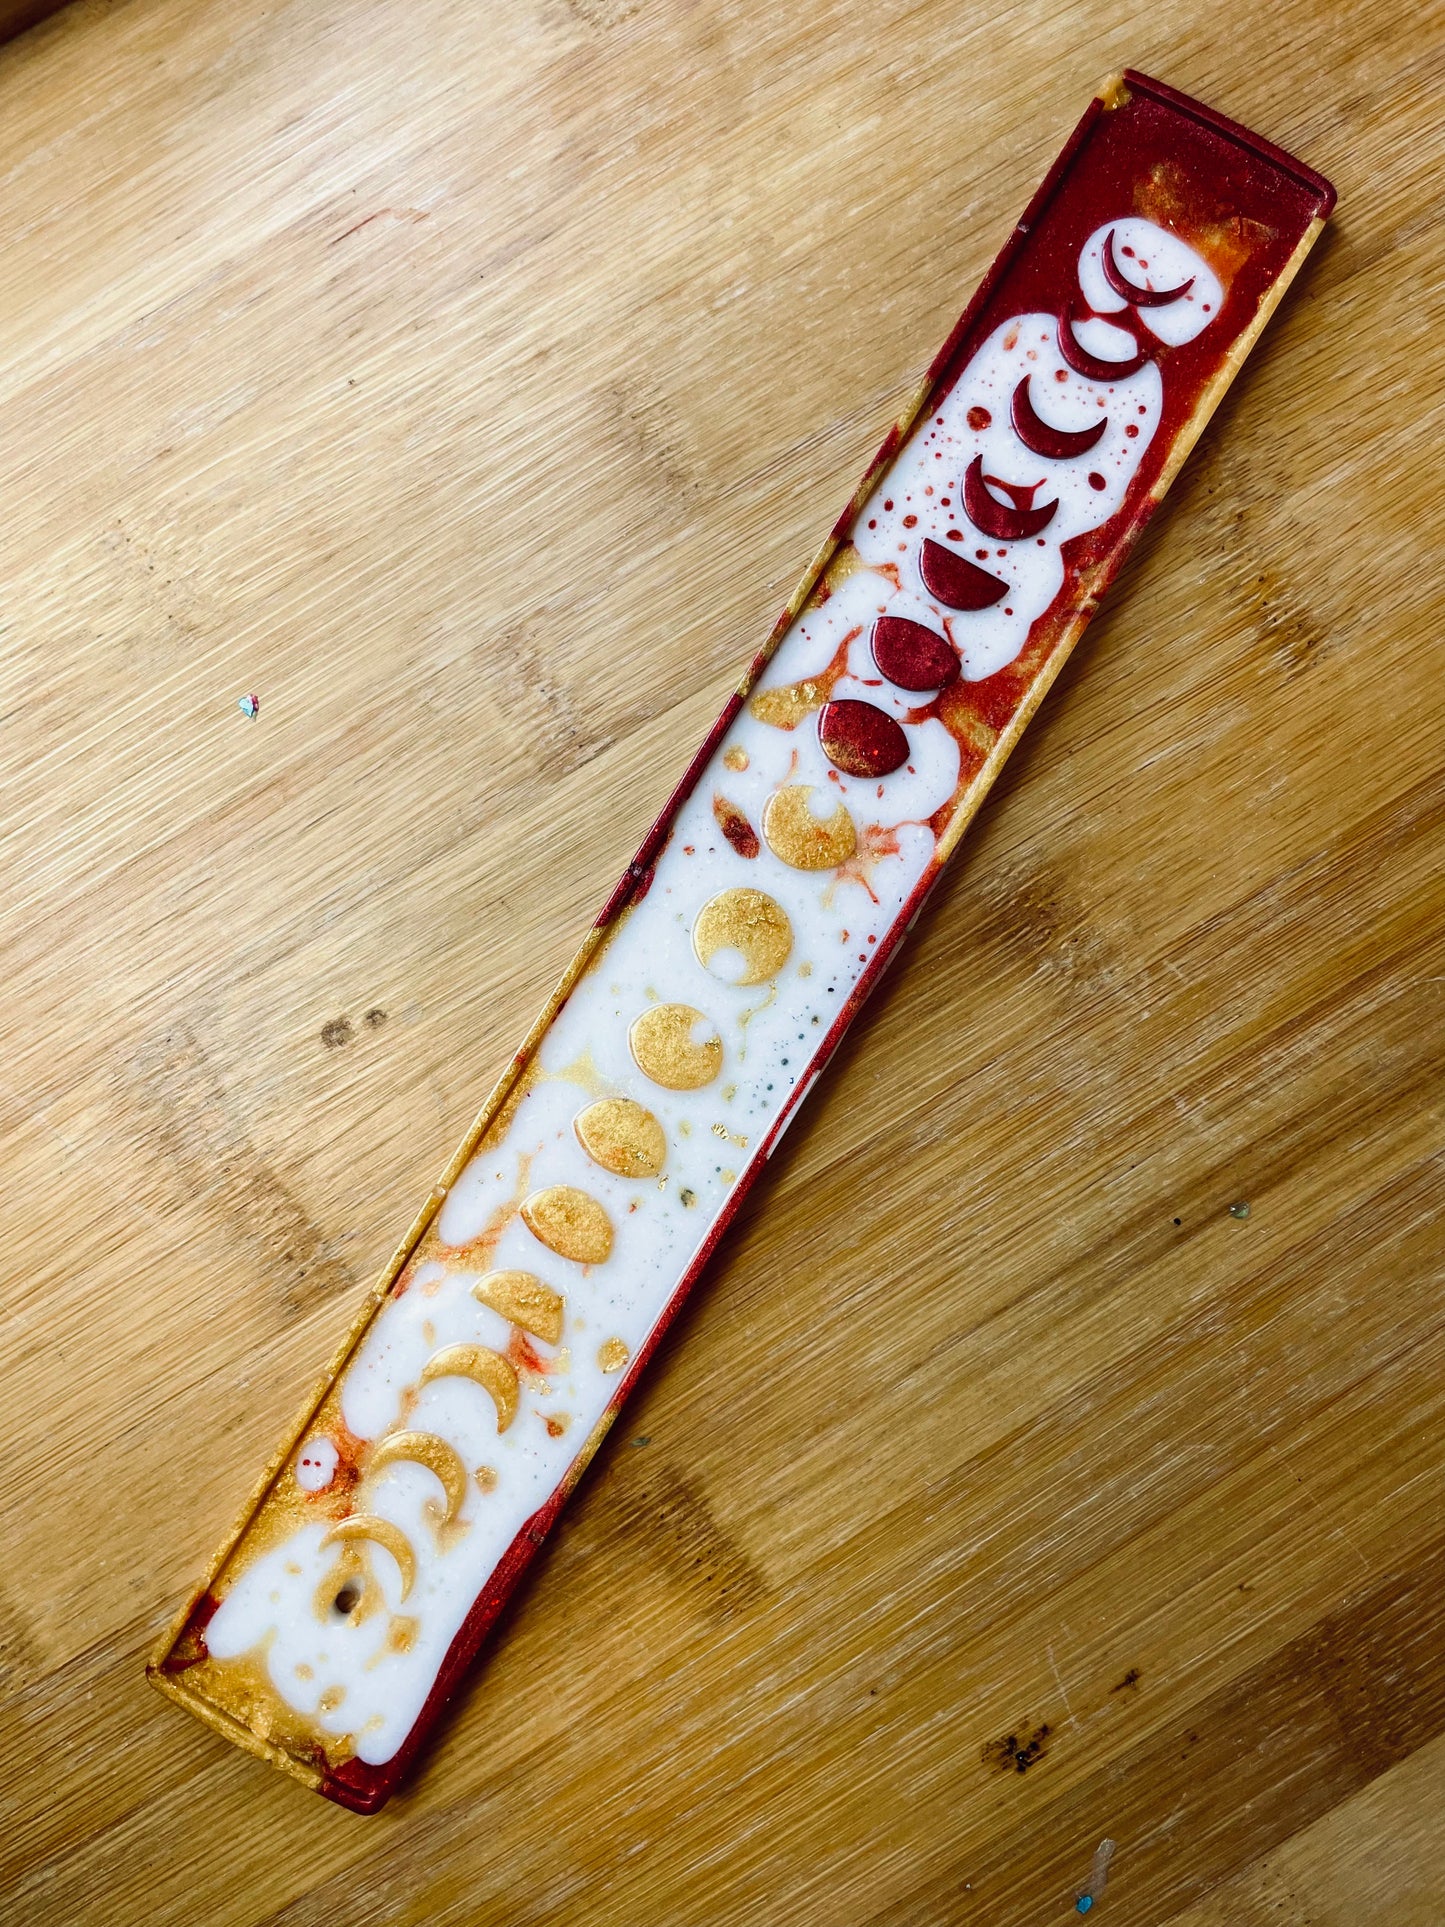 Moon Phase Incense Stick Holder / Red, White & Gold